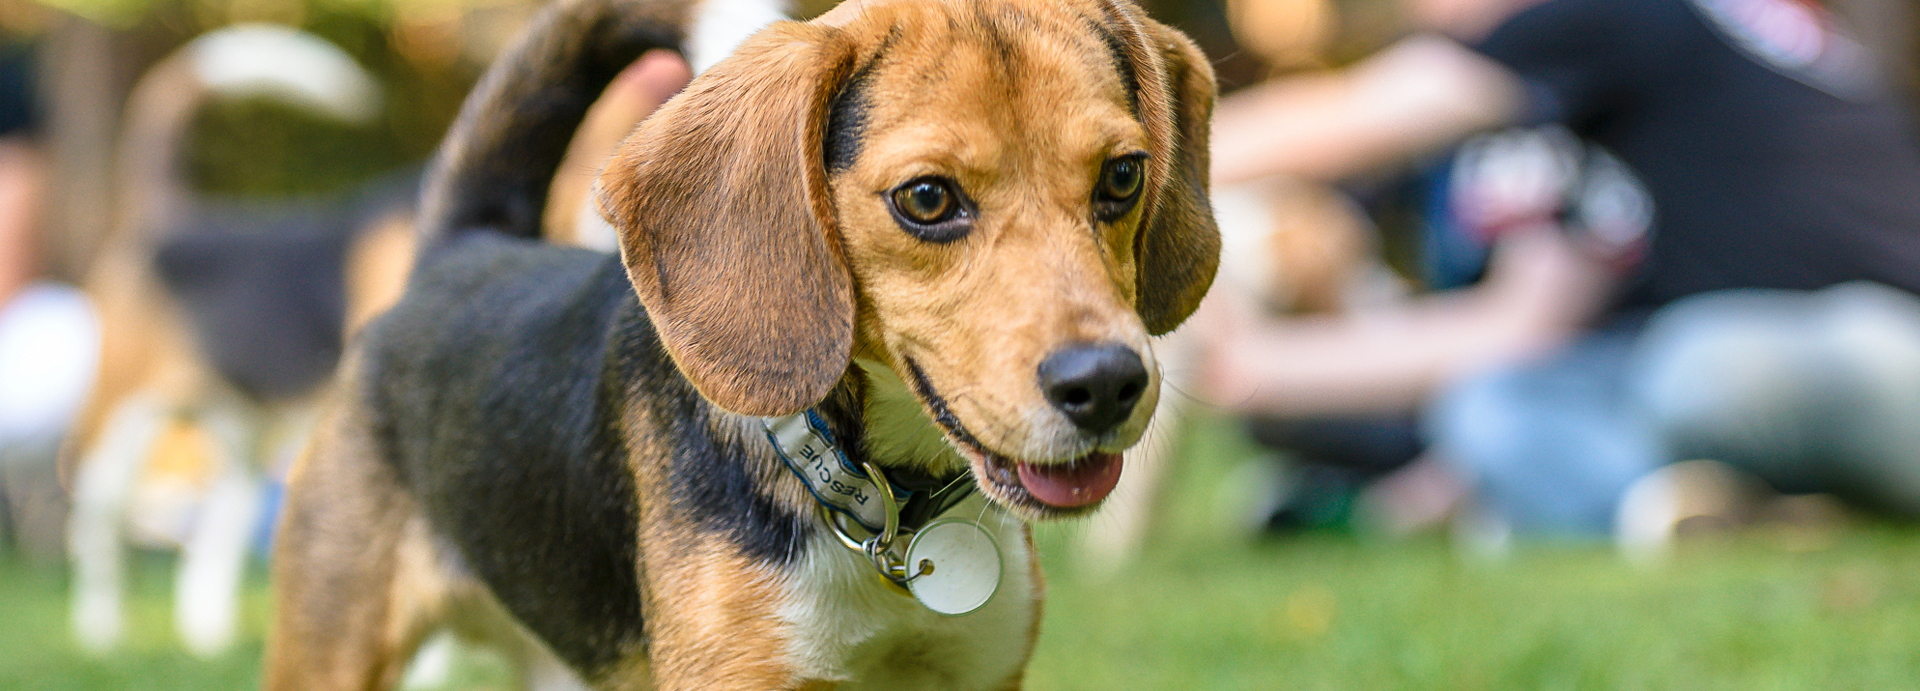 Rescue Spotlight: The Beagle Freedom Project by Hound Opinions